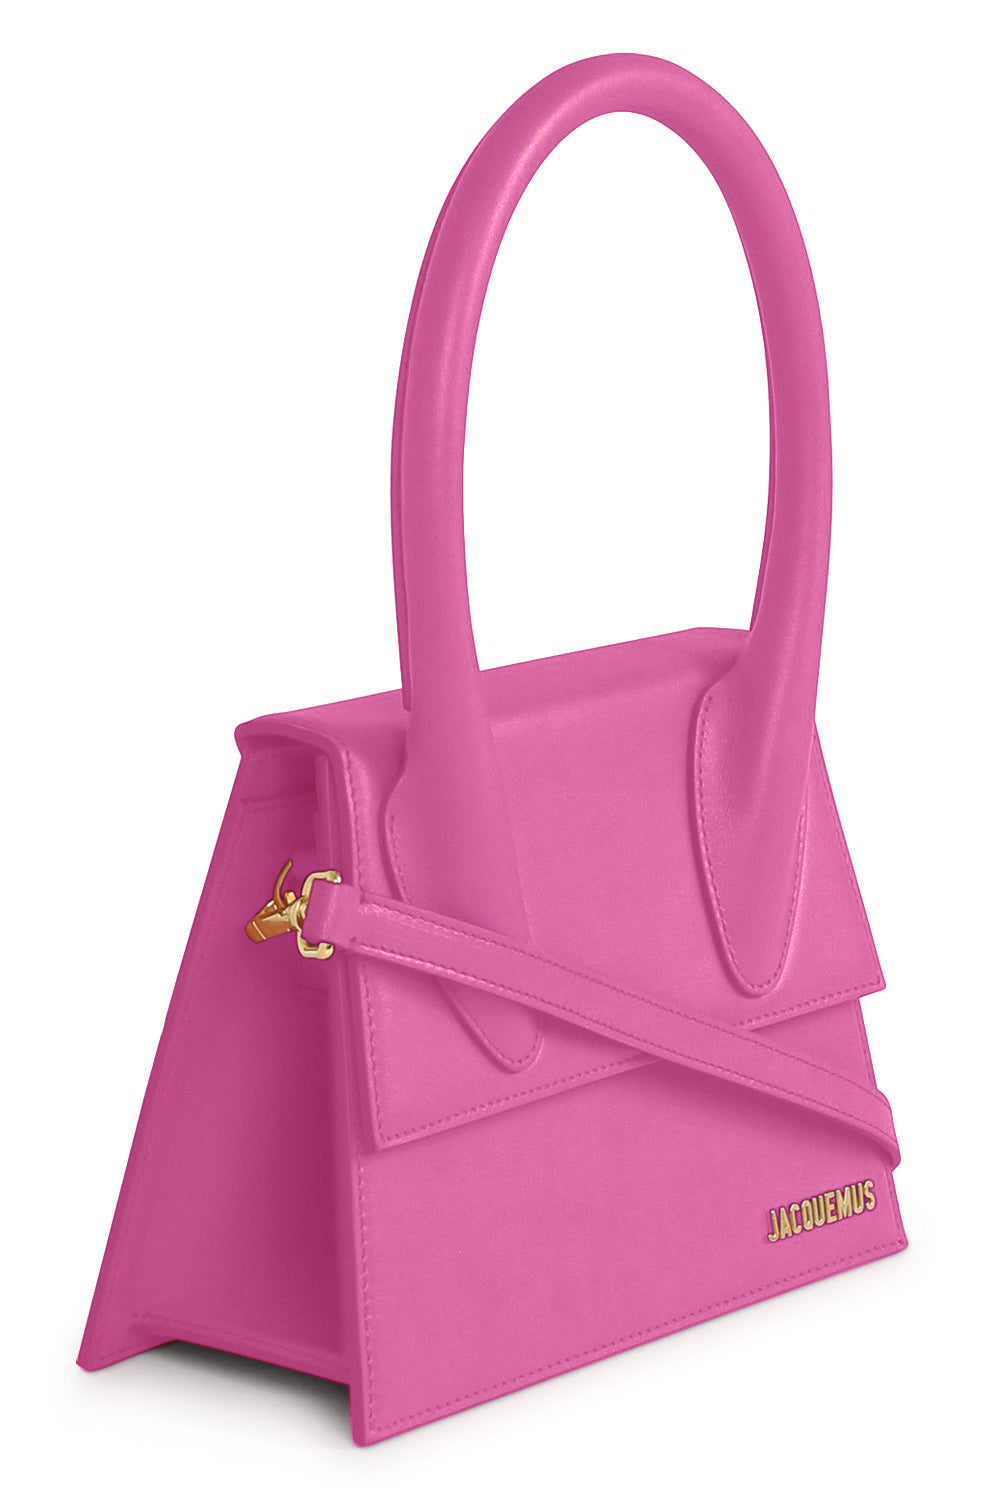 JACQUEMUS BAGS PINK LE GRAND CHIQUITO BAG | PINK